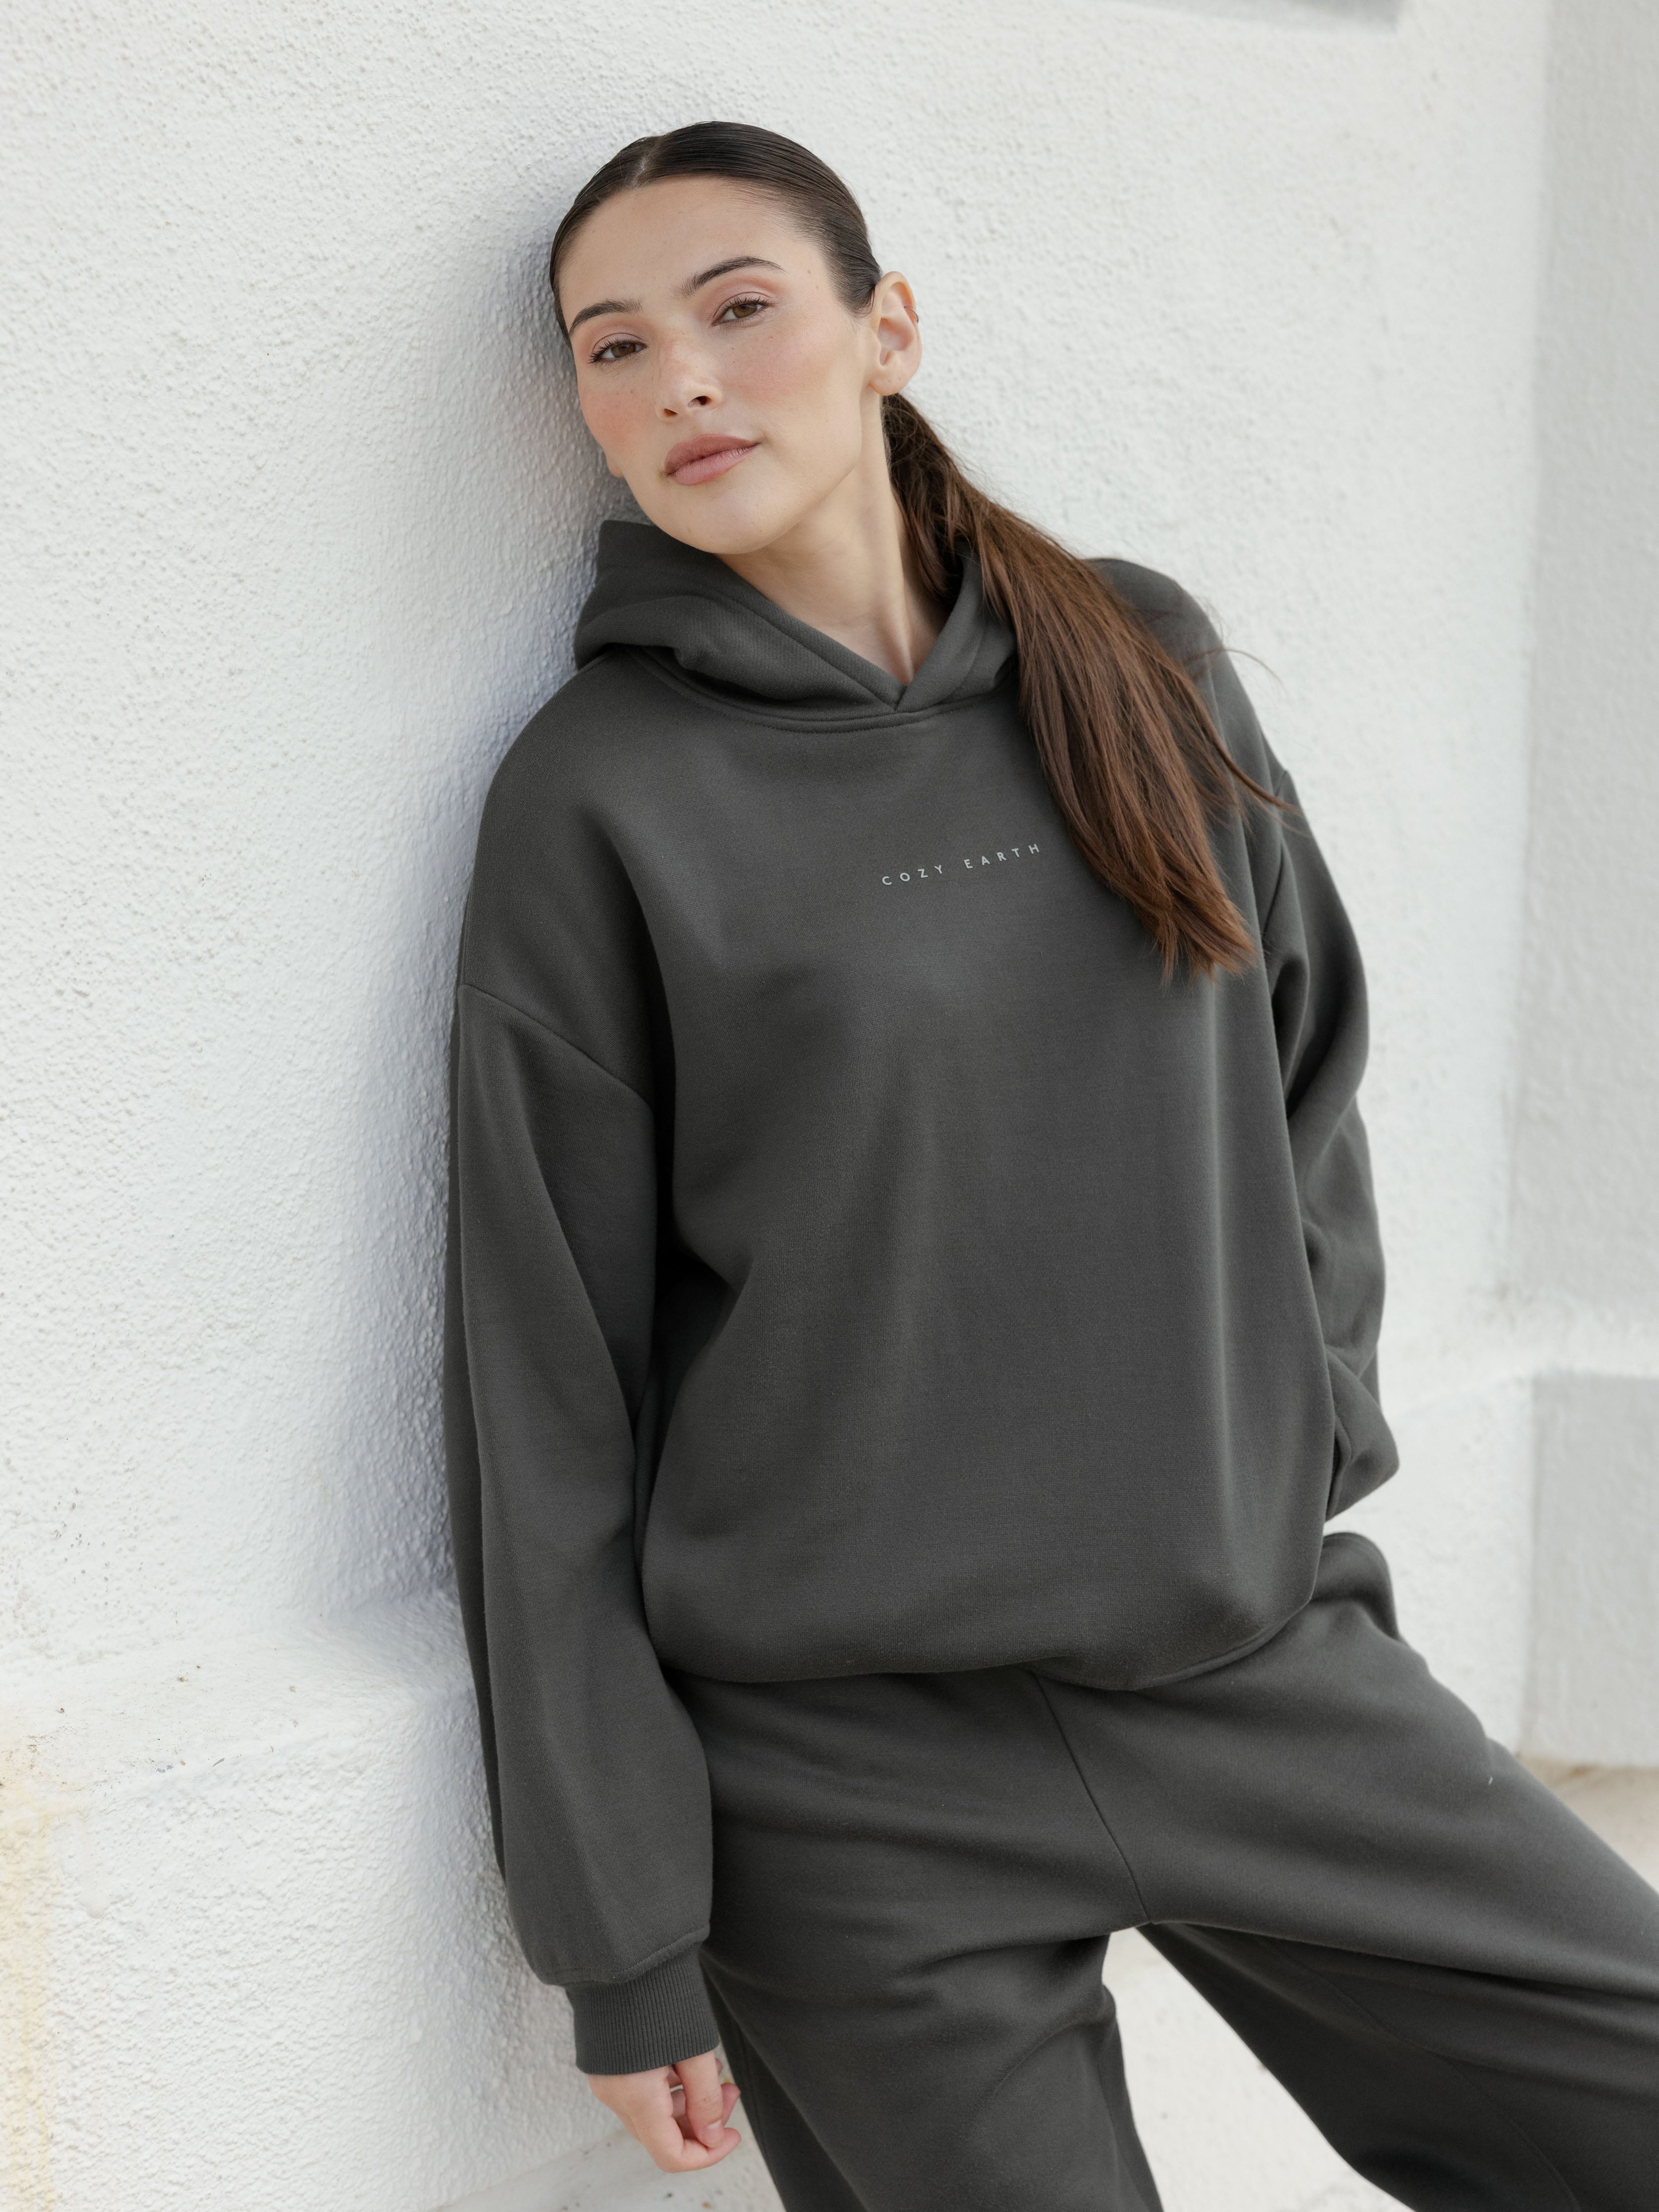 Woman in storm cityscape hoodie leaning against wall |Color:Storm